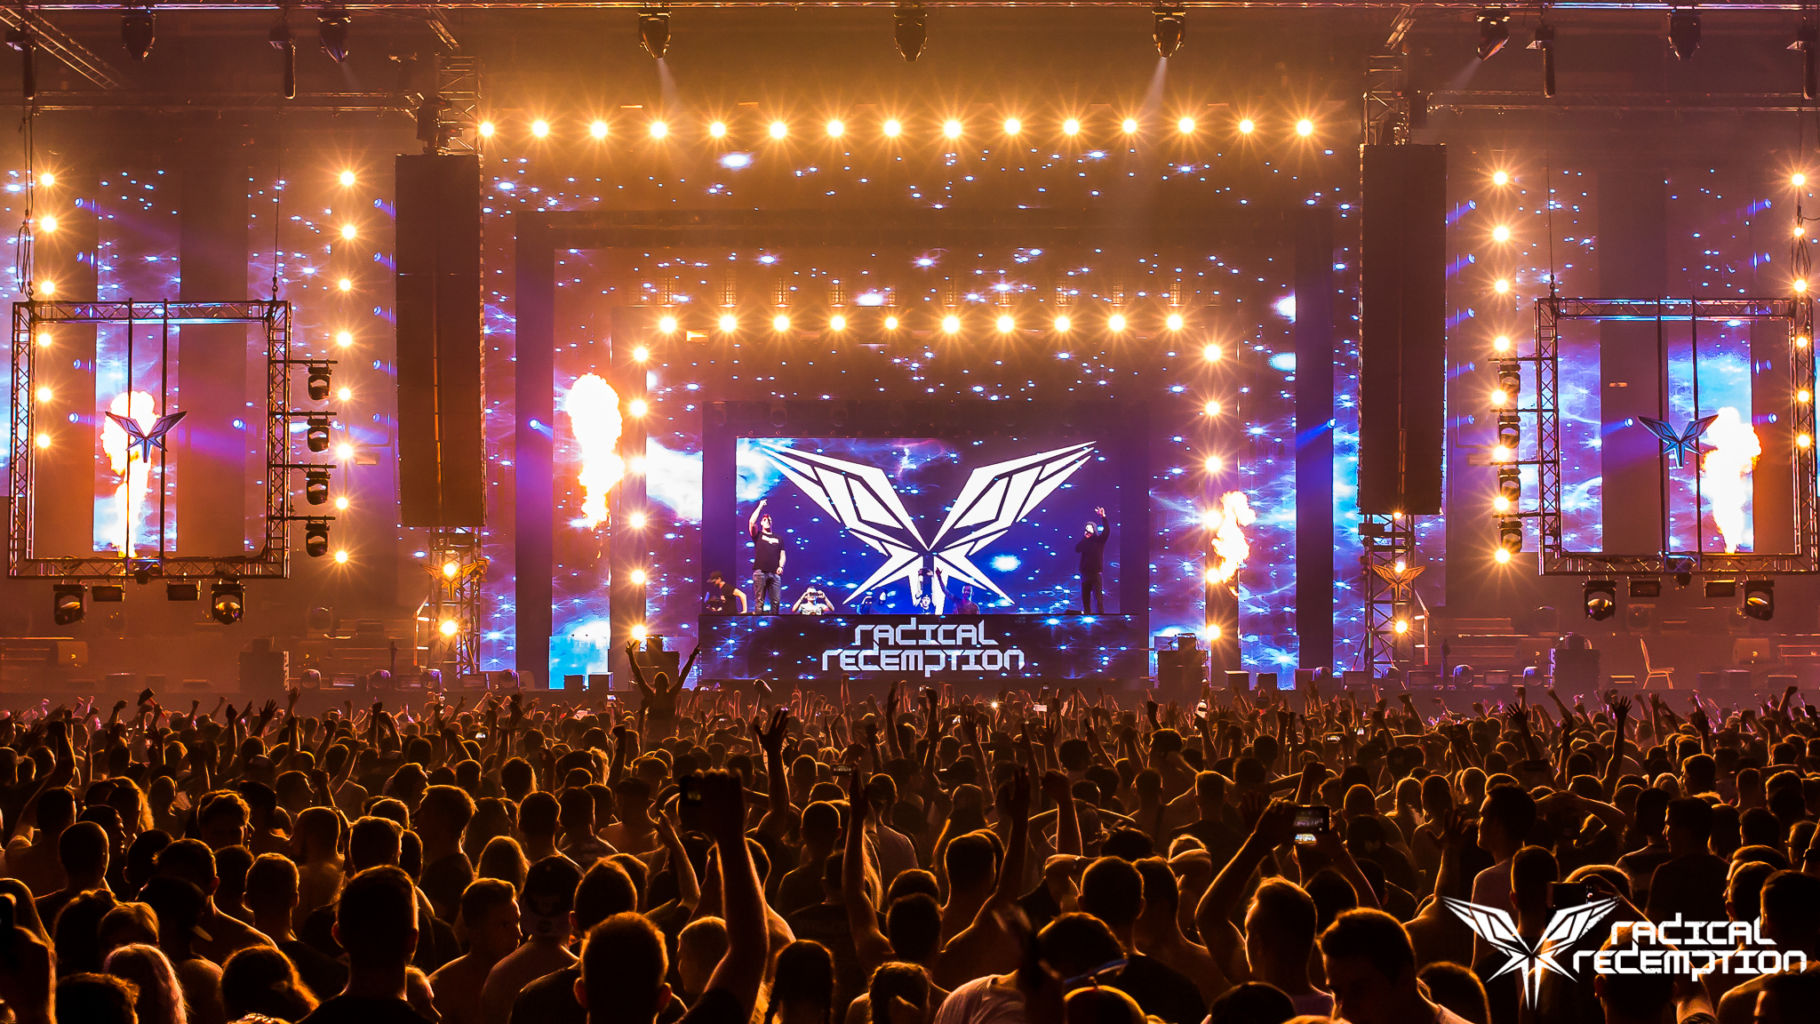 Radical Redemption – ‘Command & Conquer’ line-up